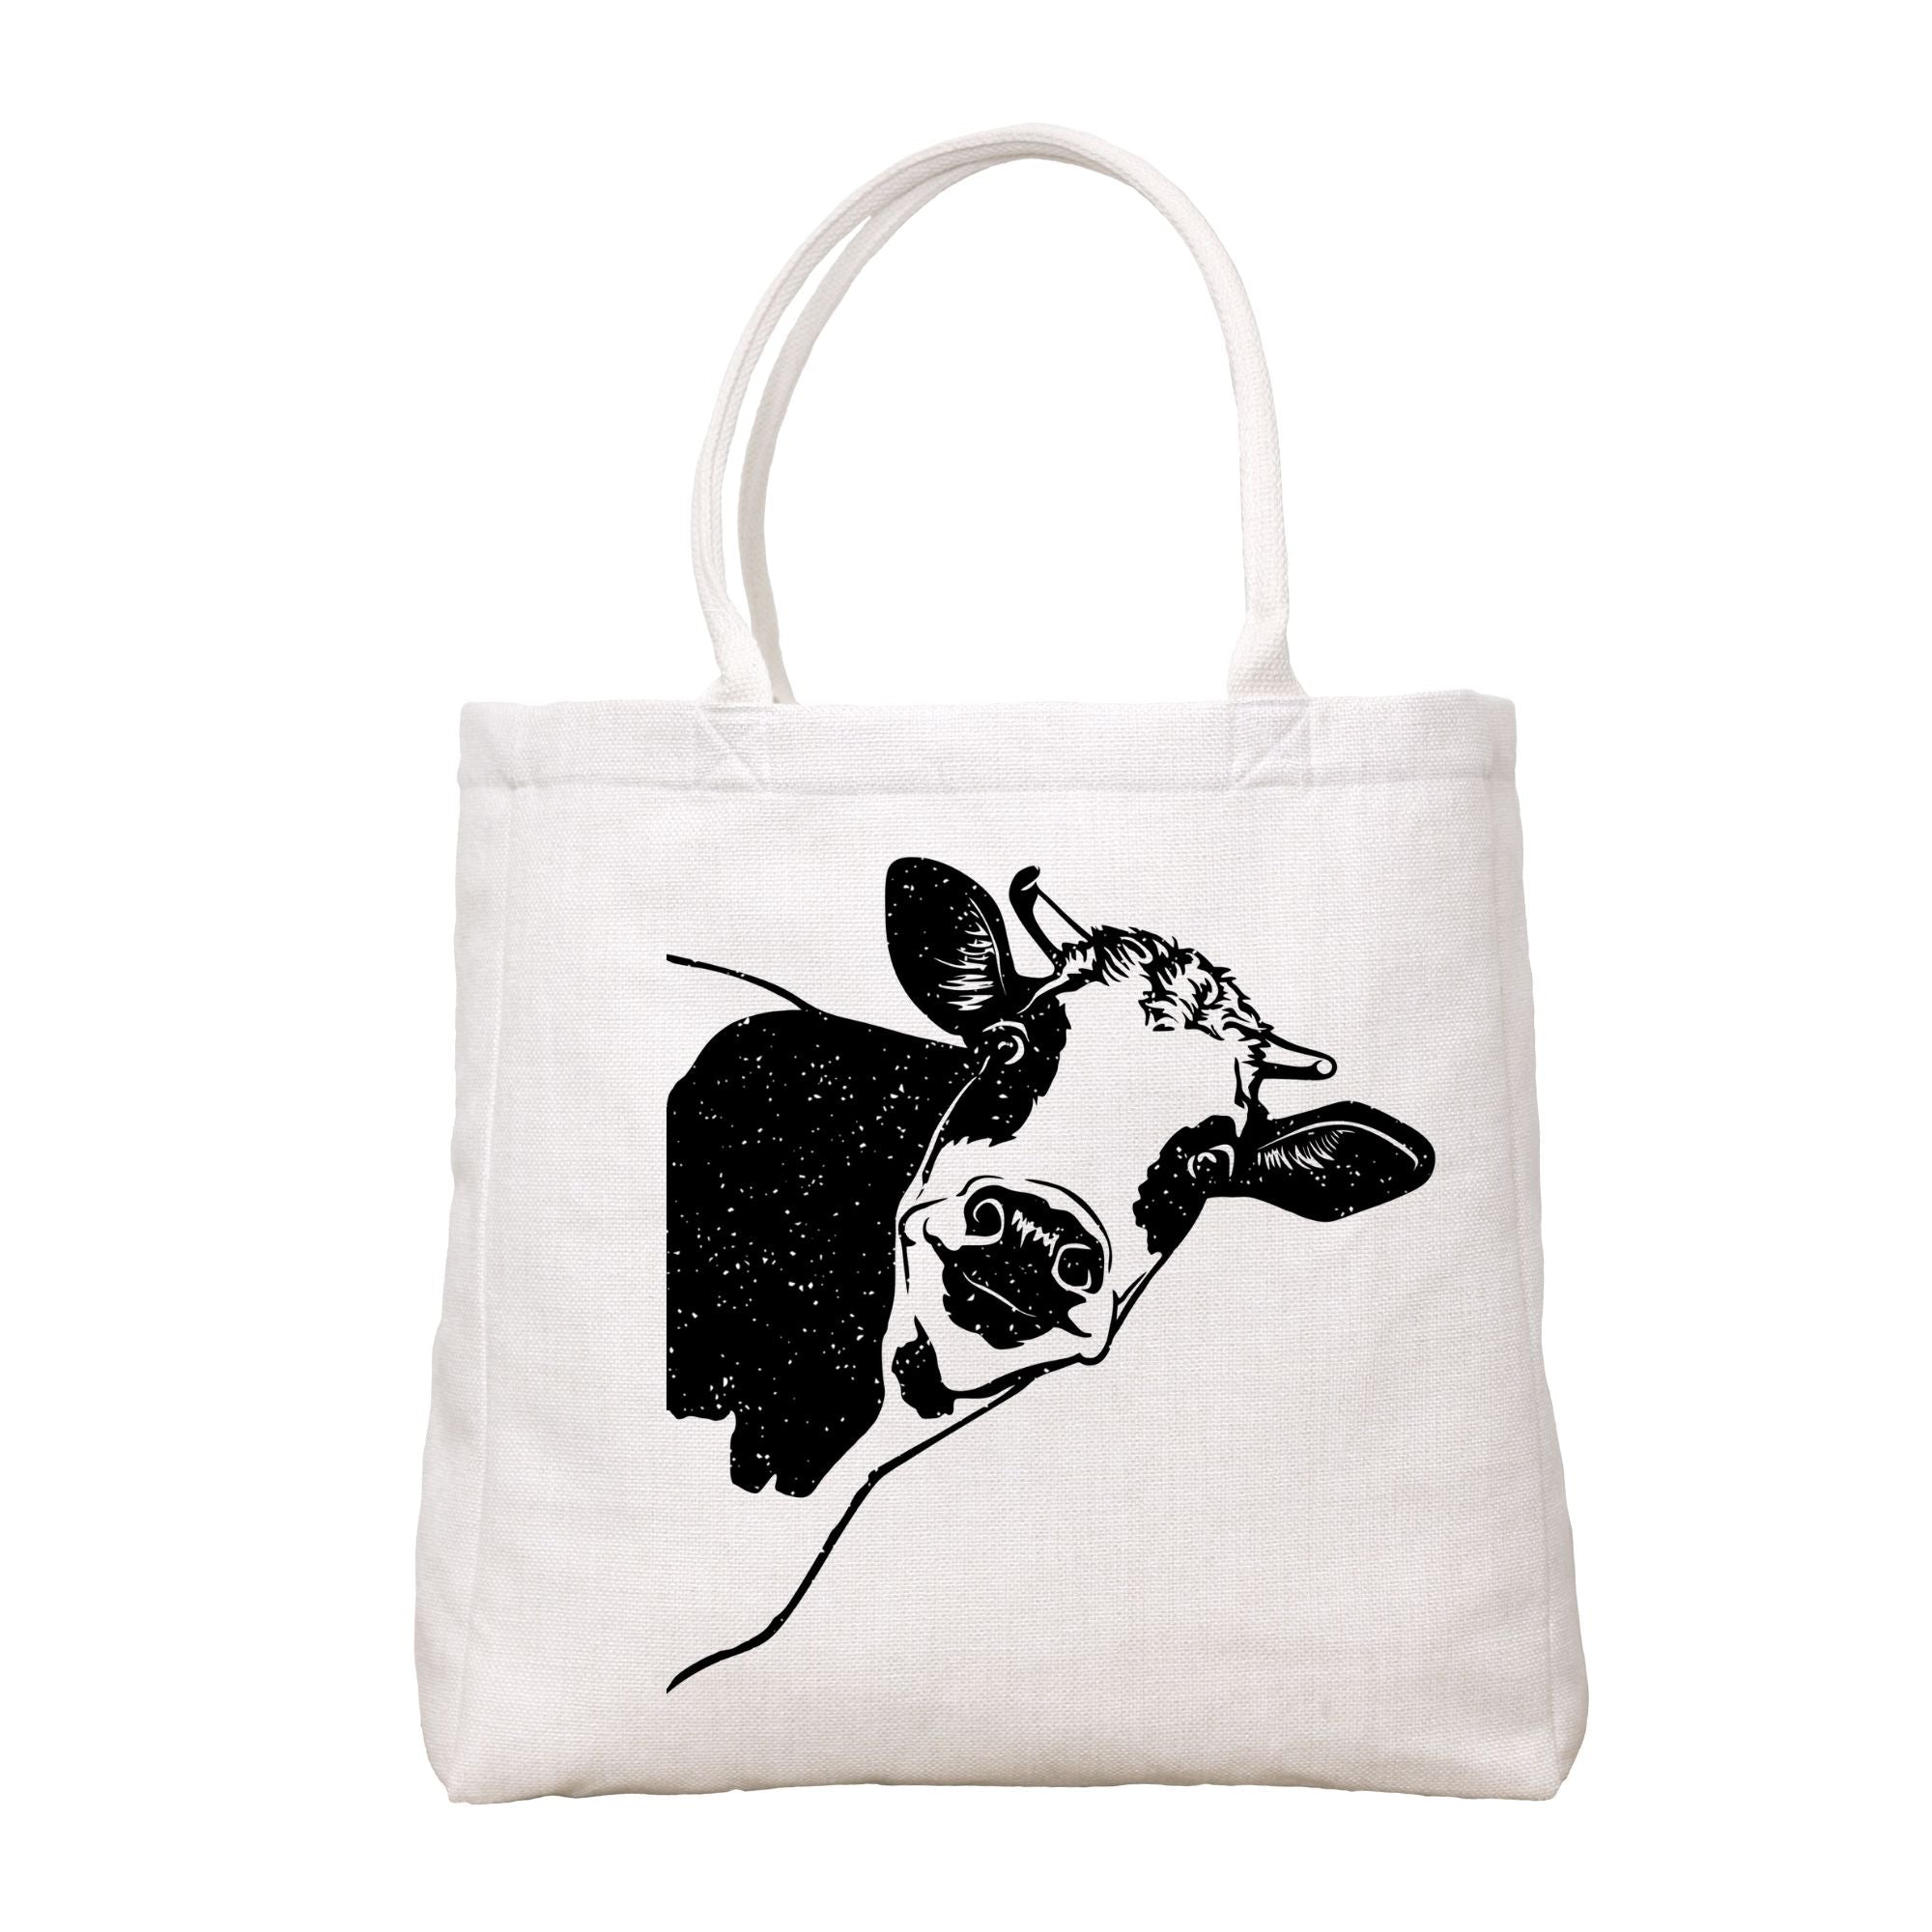 Curious Cow Tote Bag